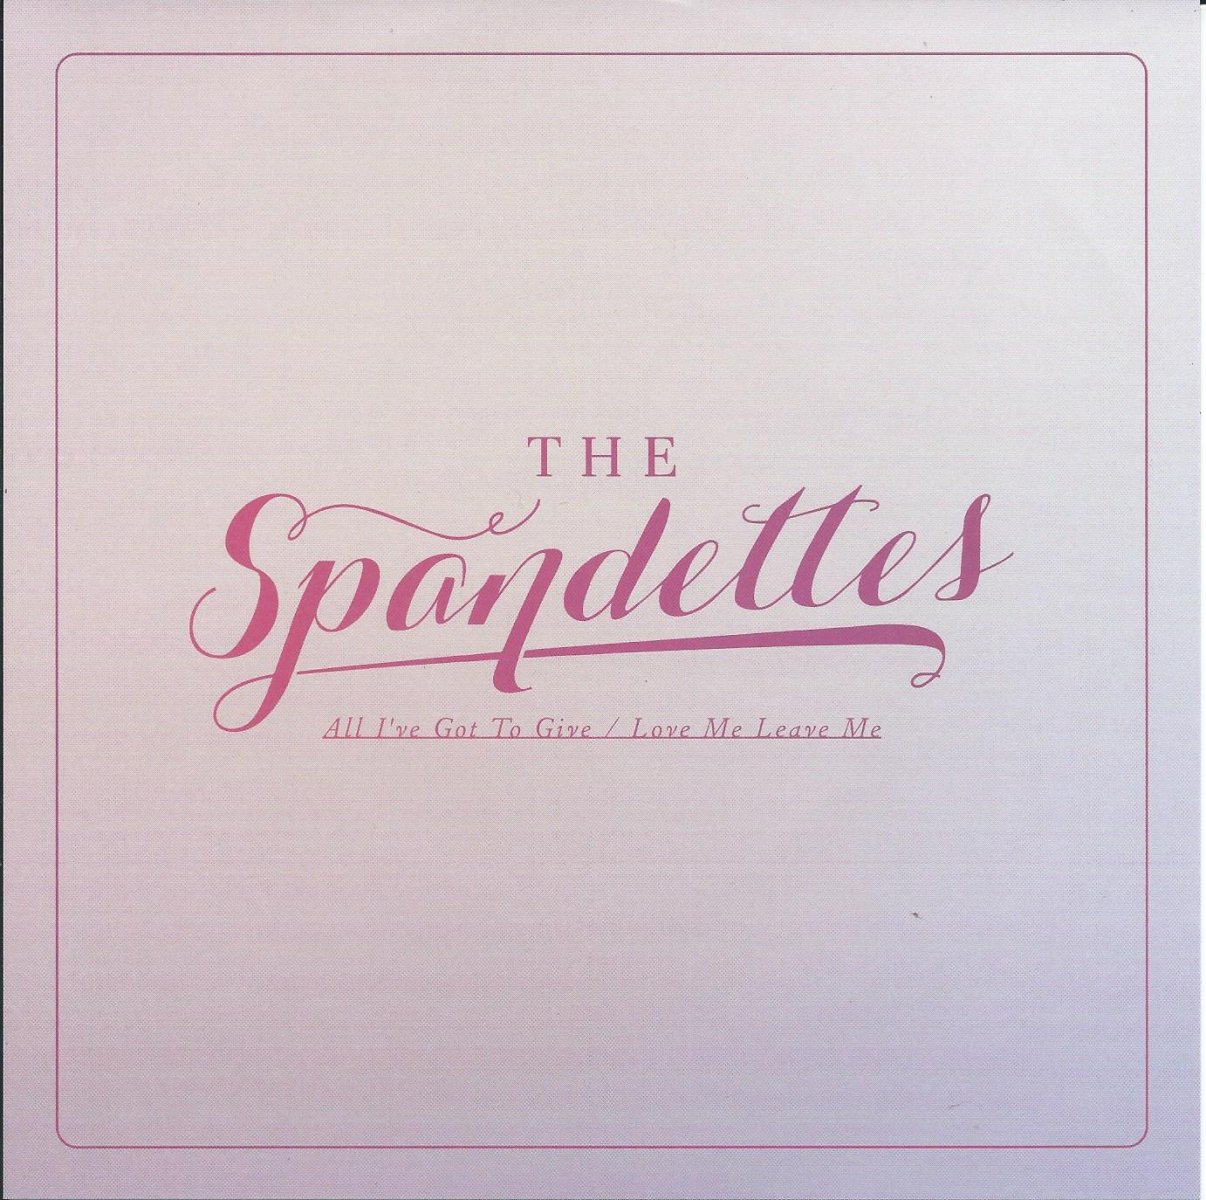 THE SPANDETTES / ALL I'VE GOT TO GIVE / LOVE ME LEAVE ME (7